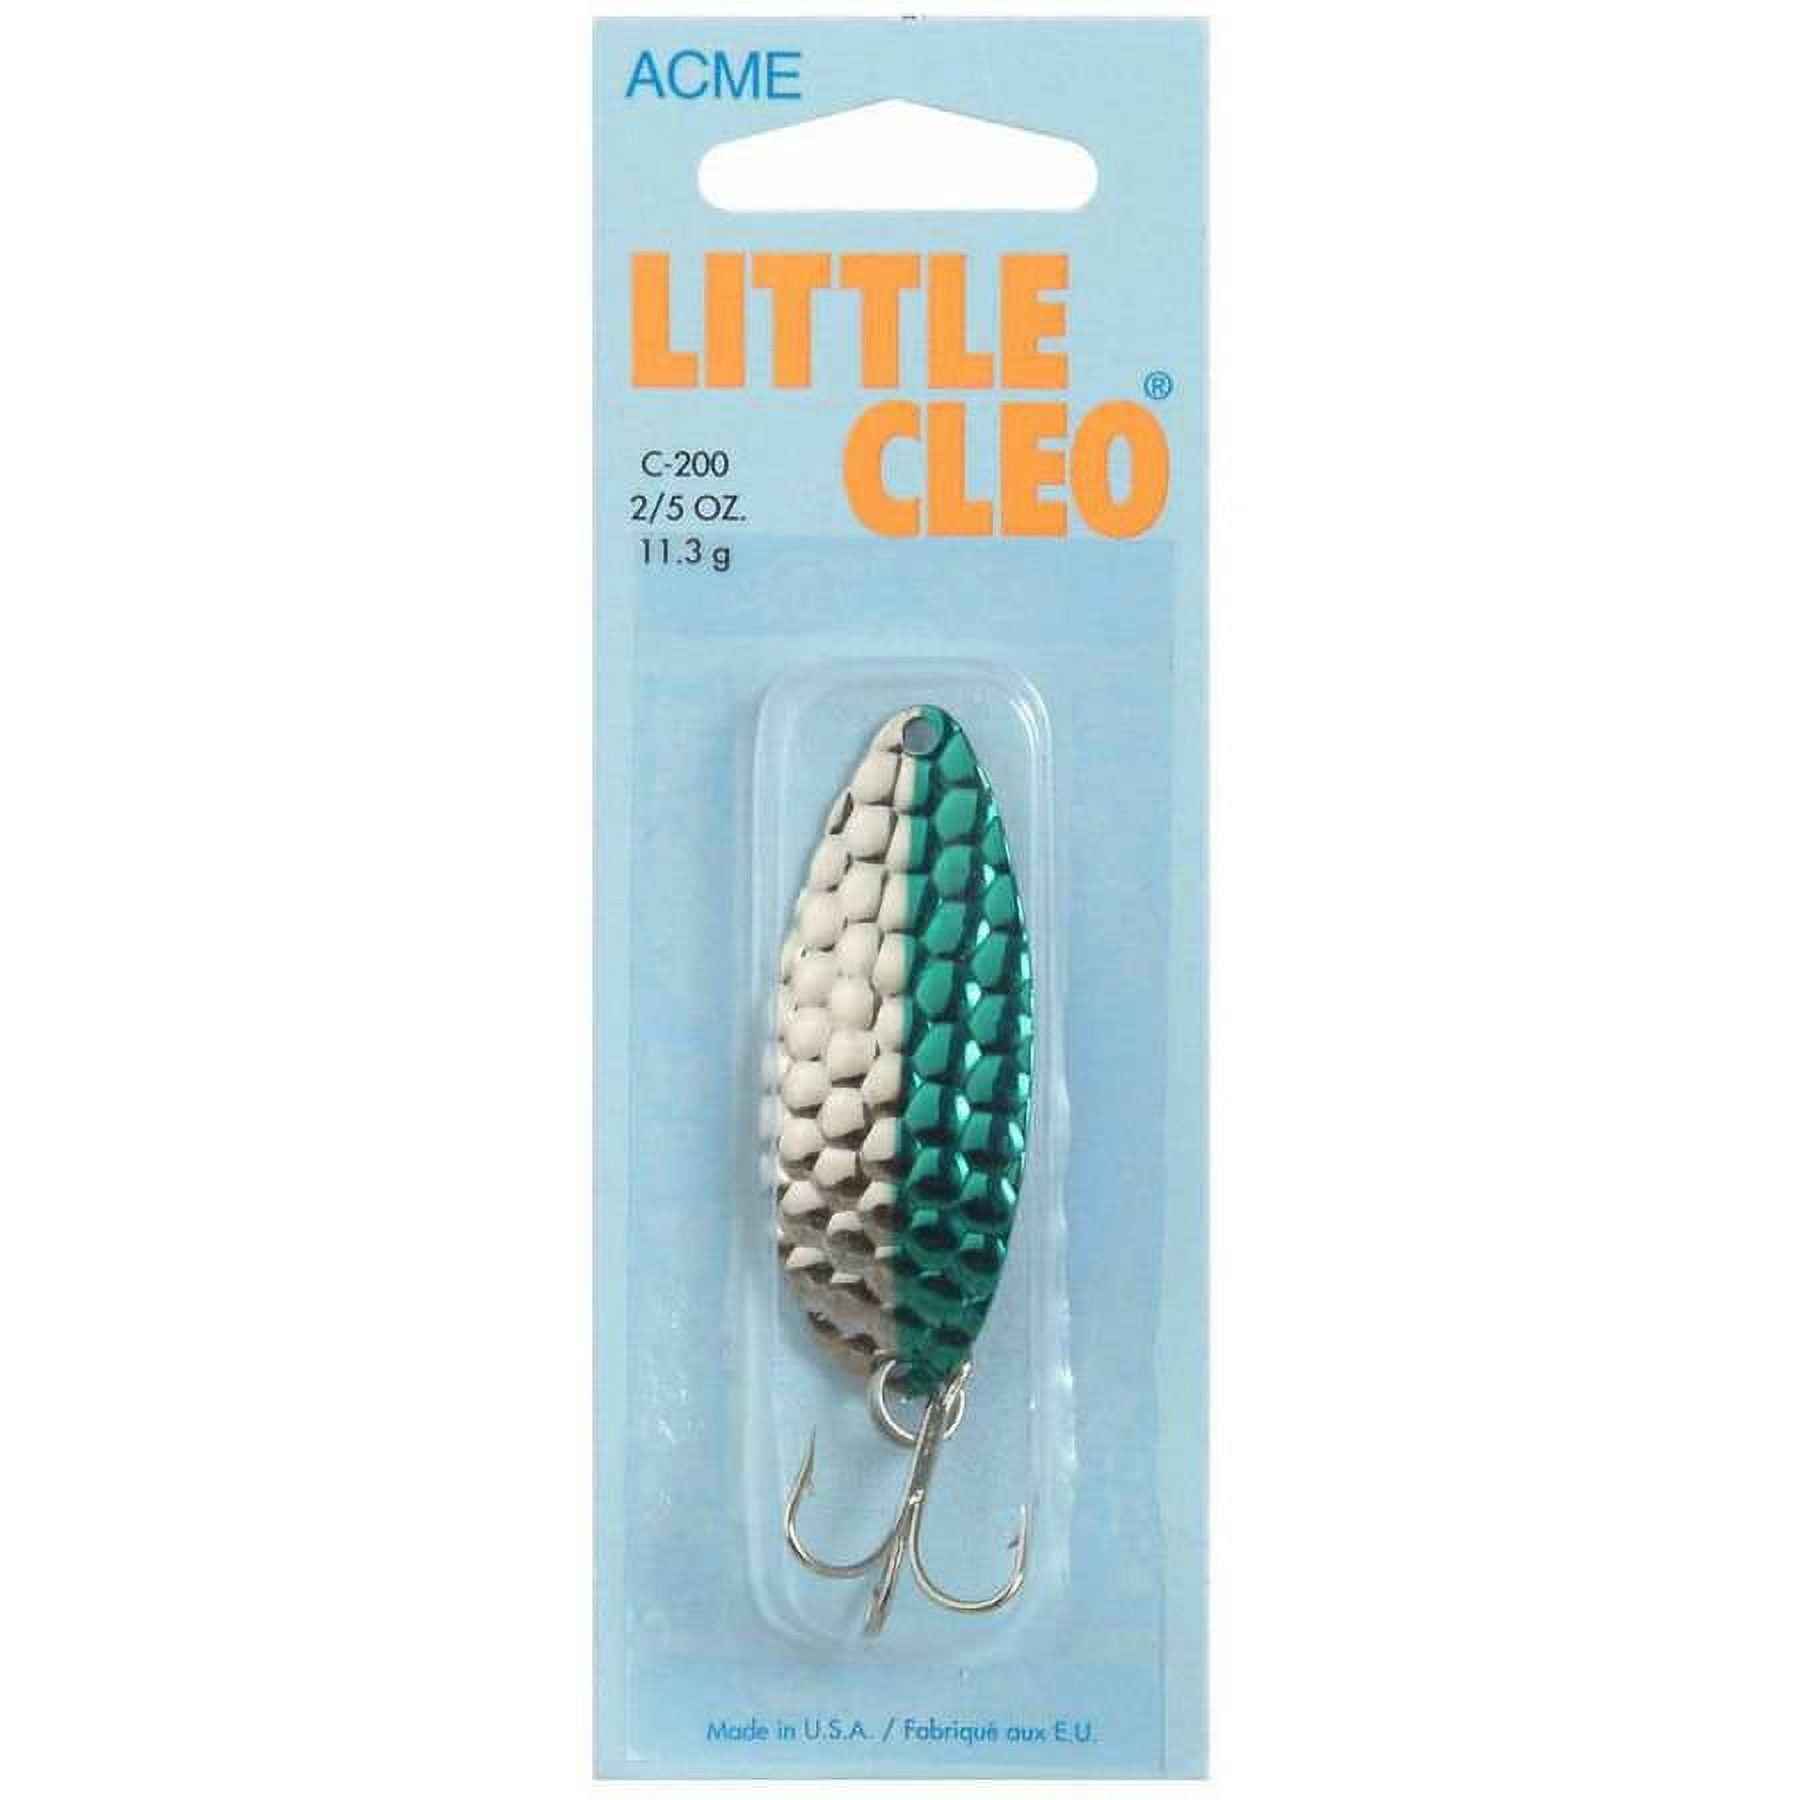 Acme Little Cleo Spoon Hammered Neon Green; 2/5 oz.